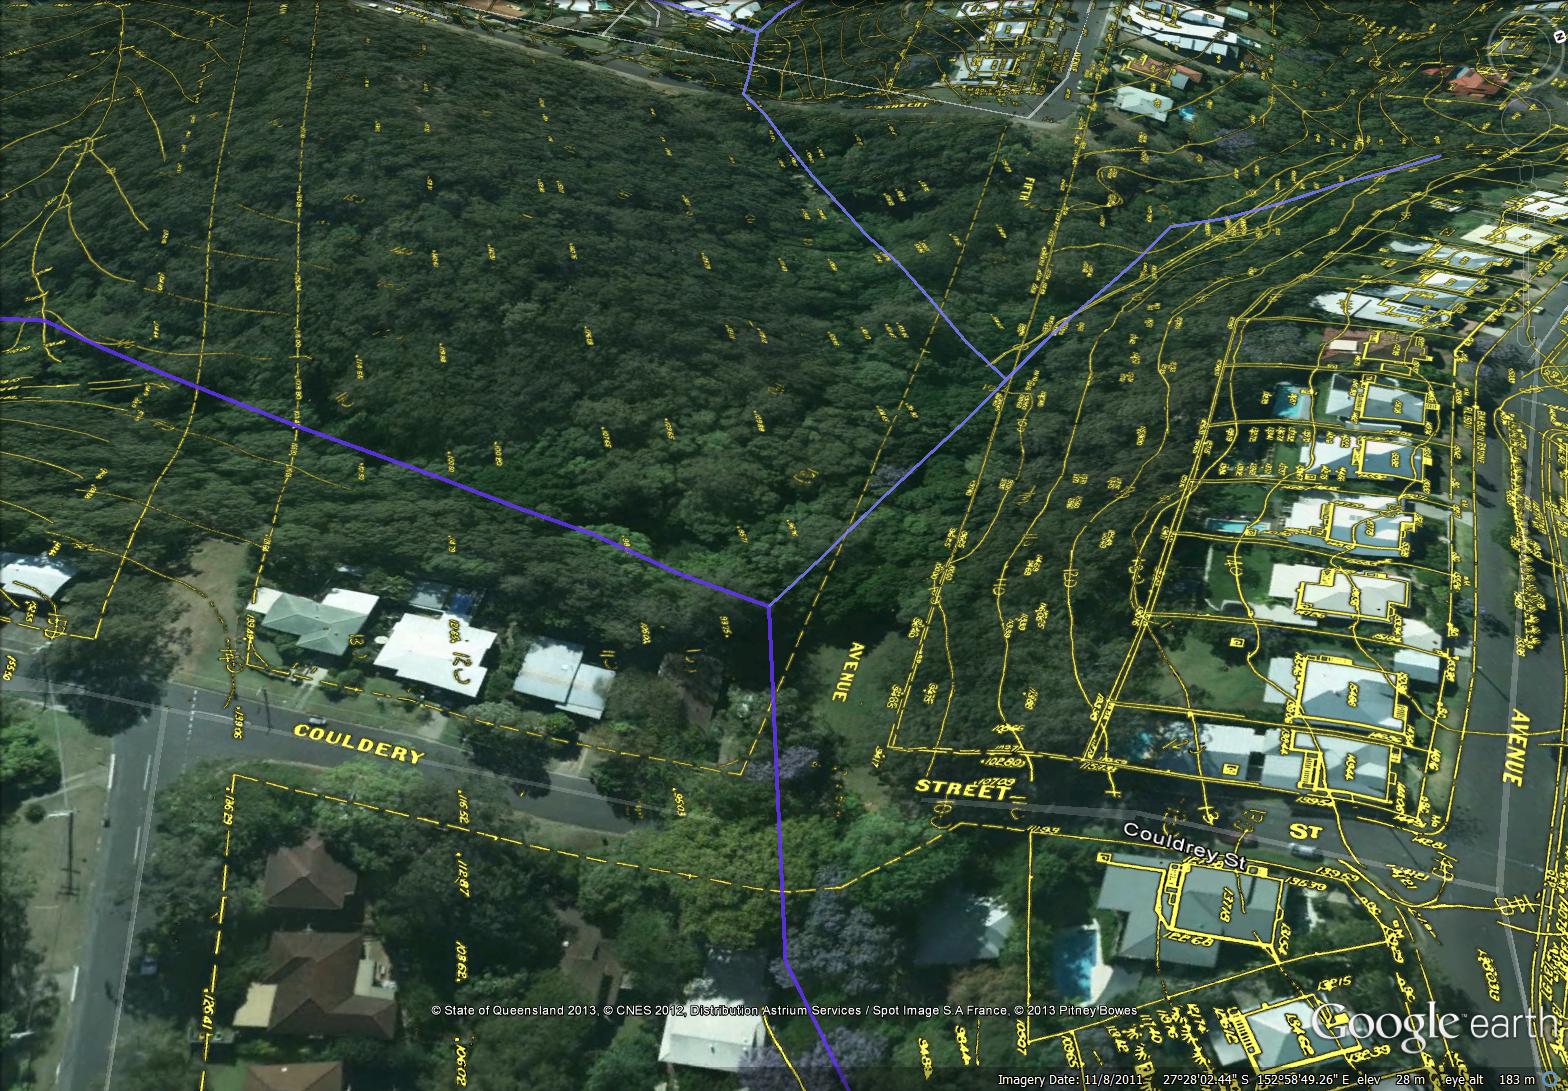 The path of Western Creek through the bushland above Couldrey Street, showing features from the City Council's 'Detail Plans' from the 1940s-1960s.